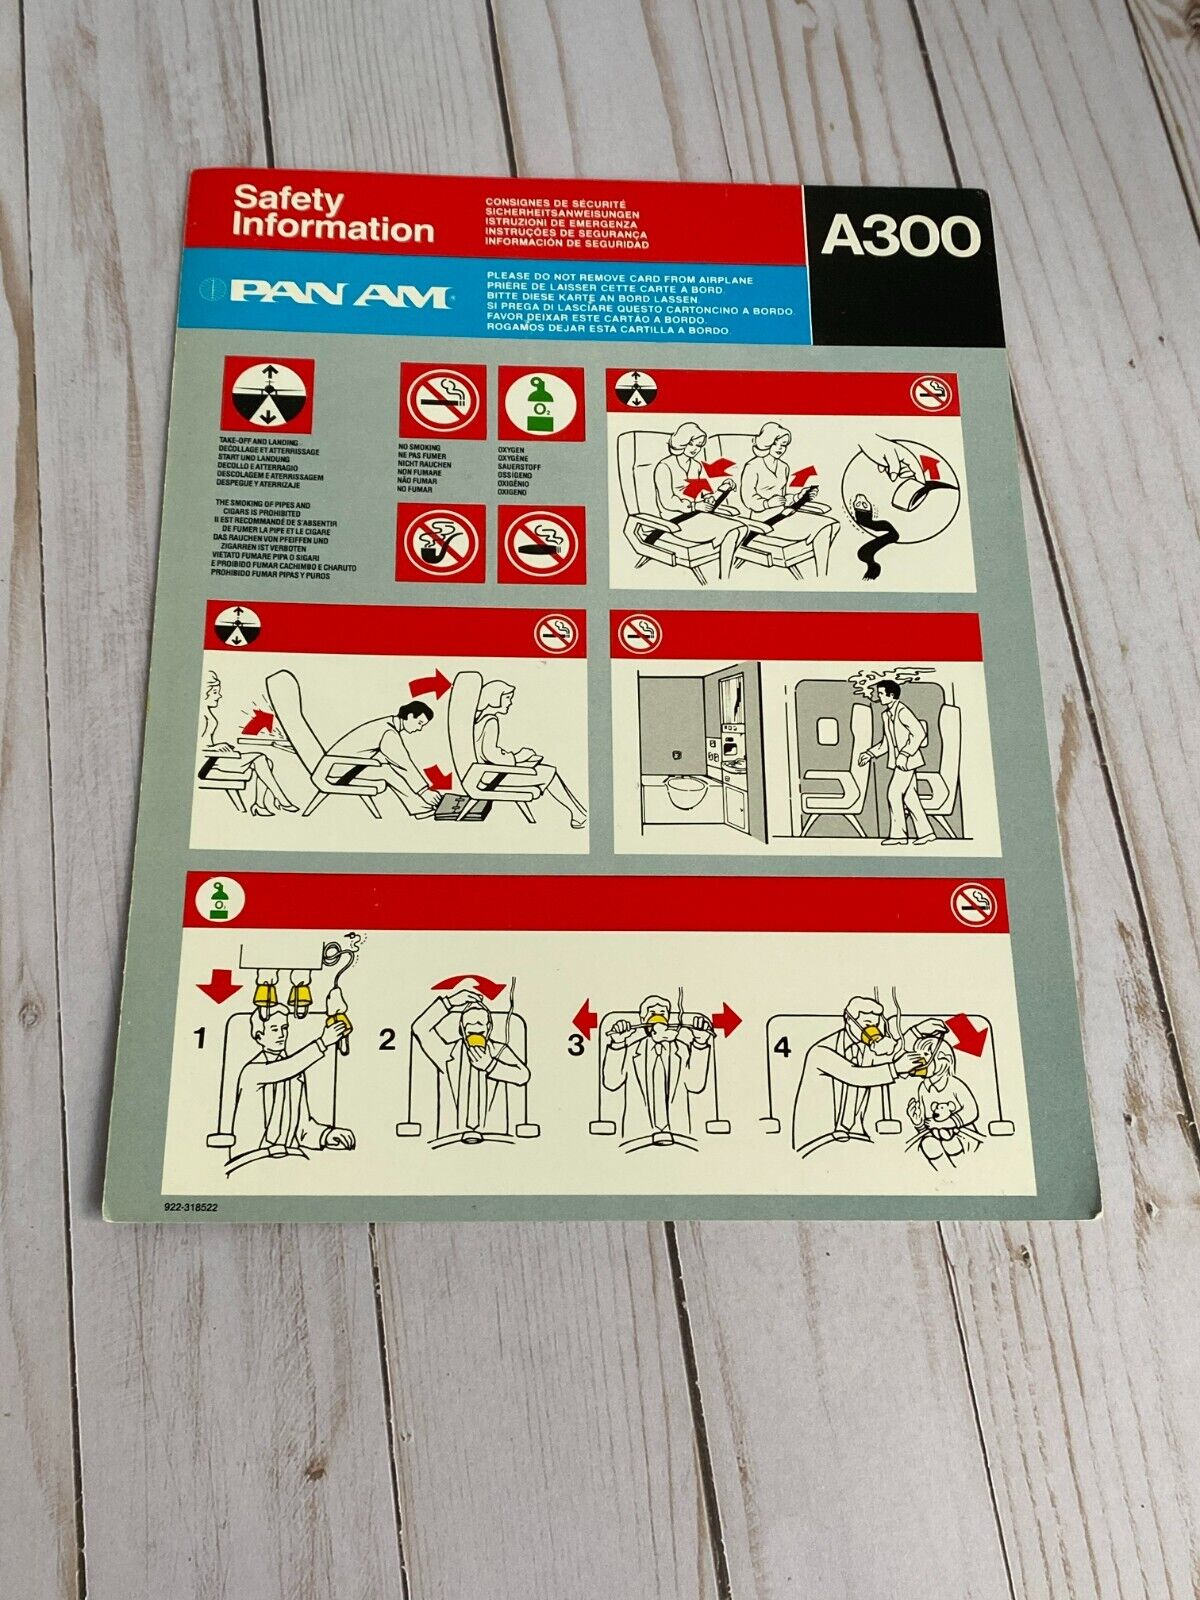 PAN AM Airbus A300 Safety Card